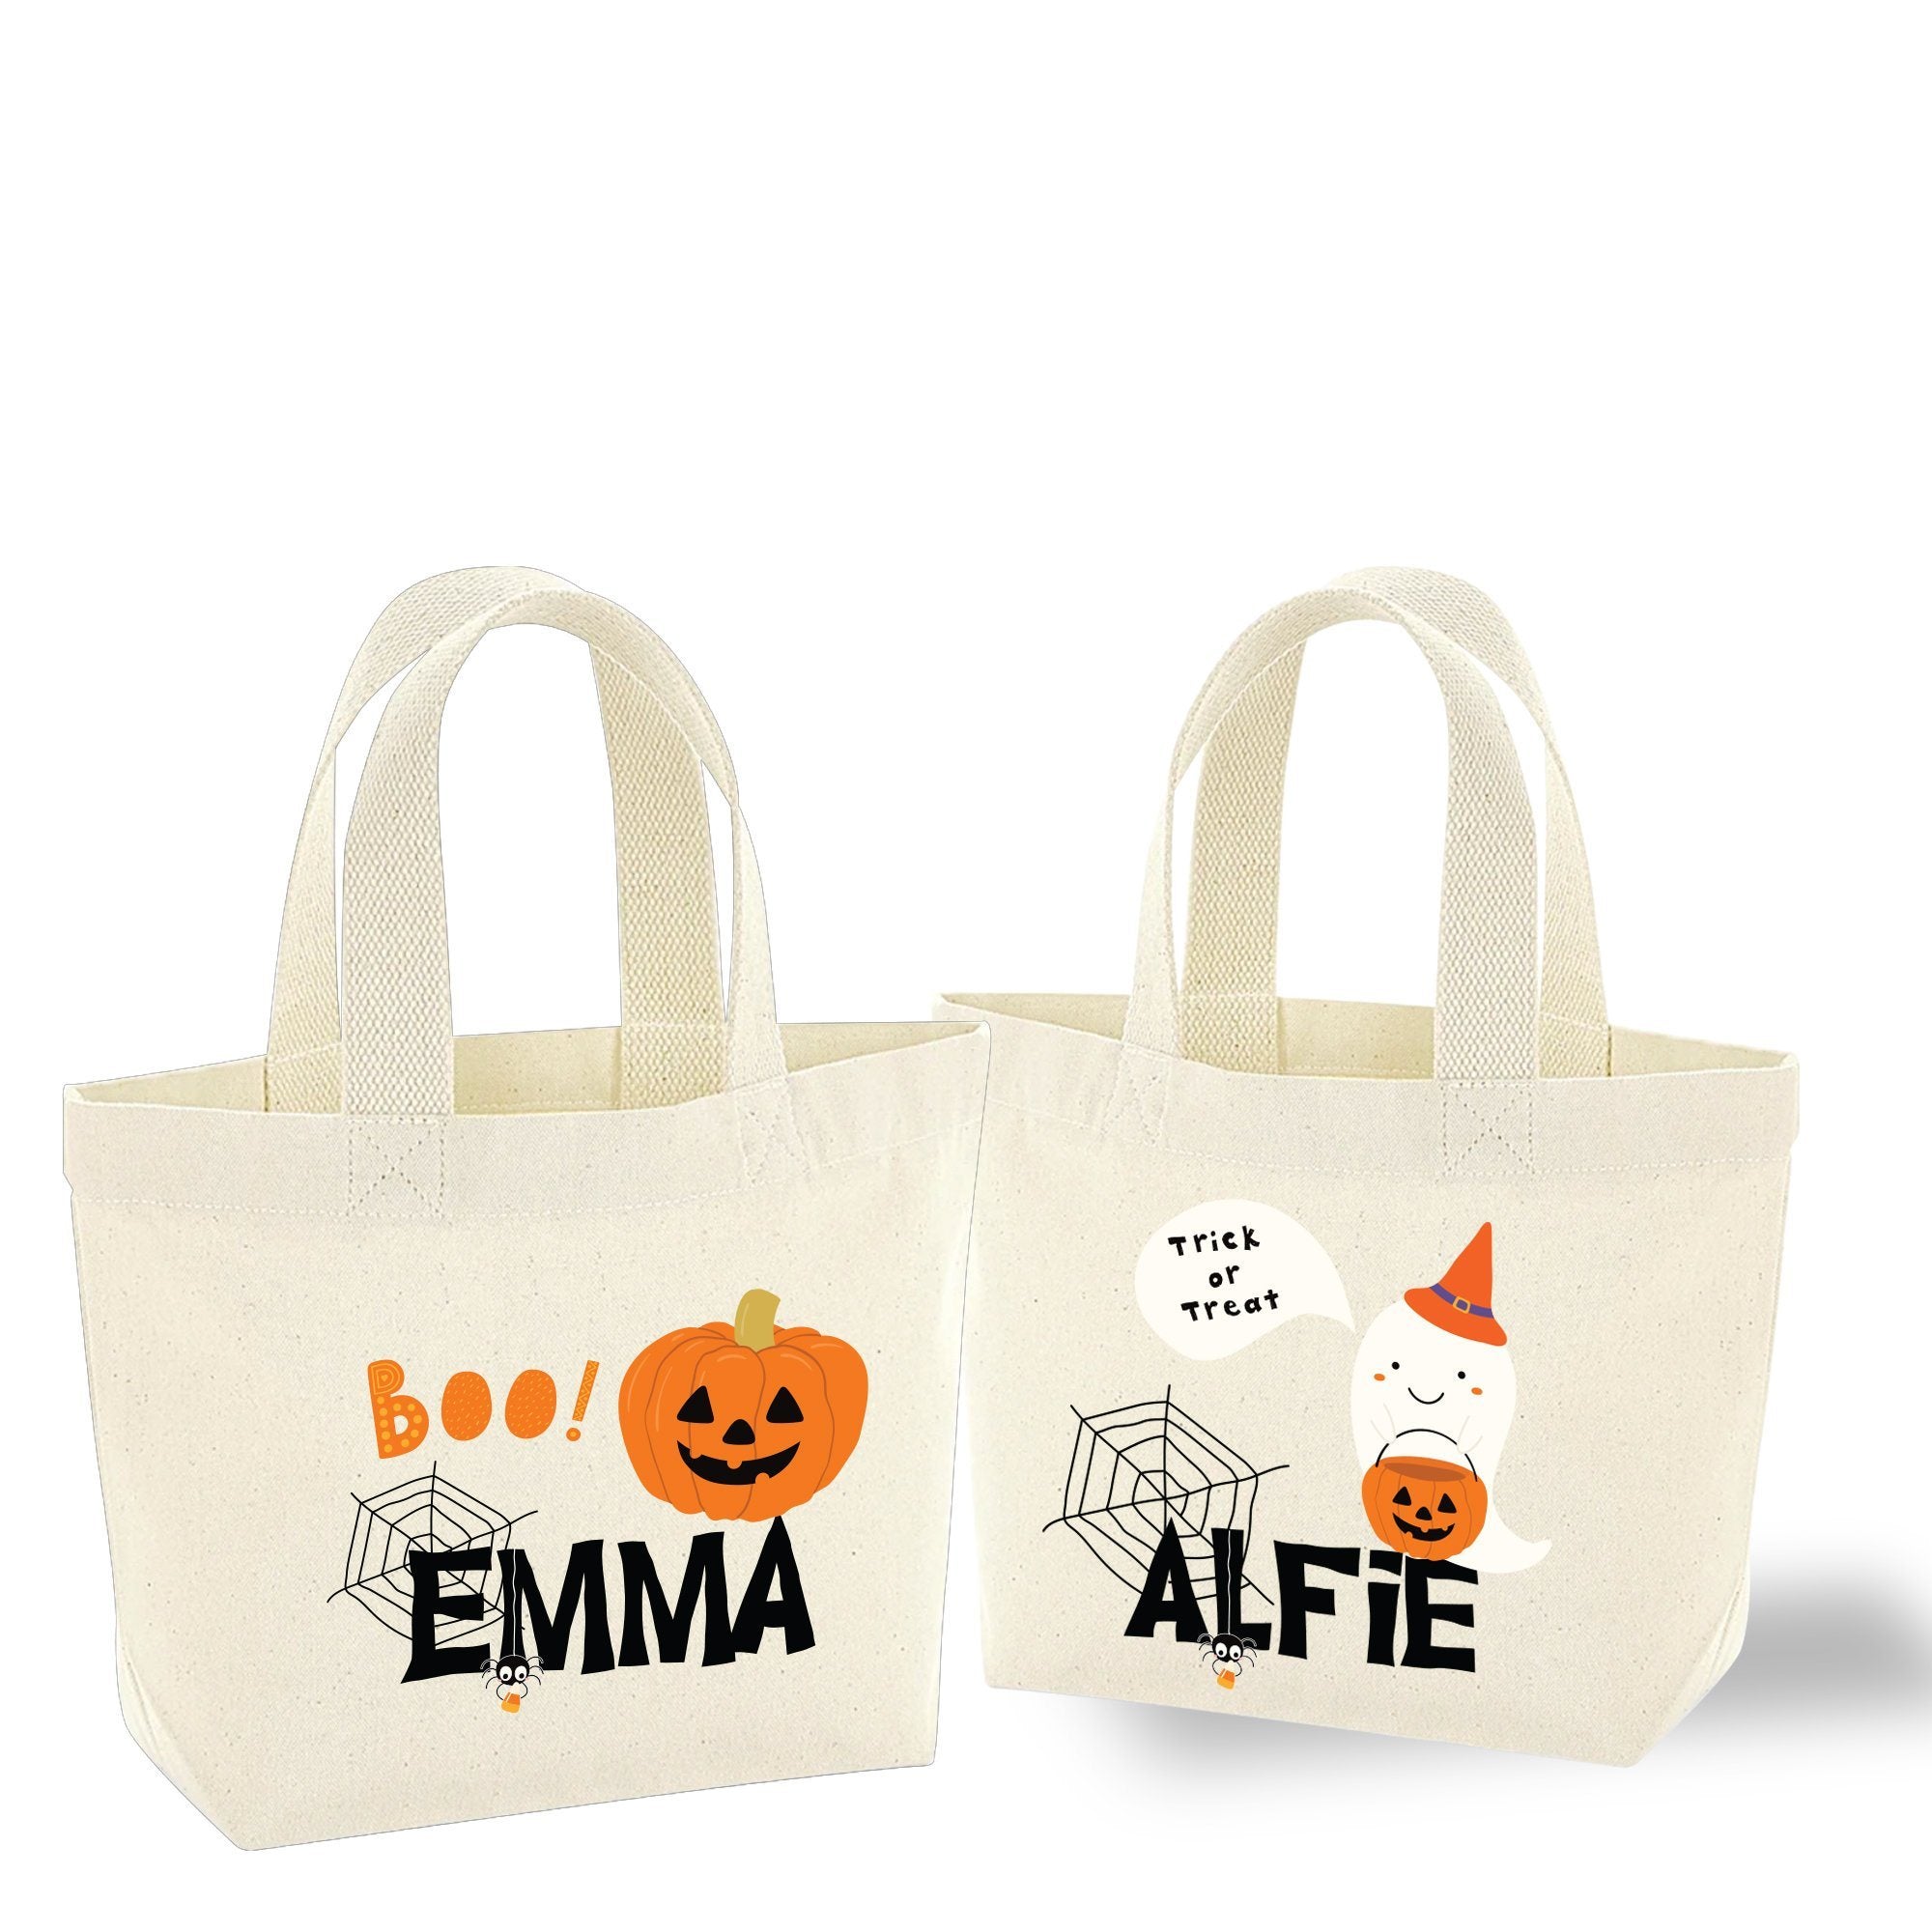 Personalised cute mini Halloween bag with name, Trick or treat bags, Girls or boys baskets